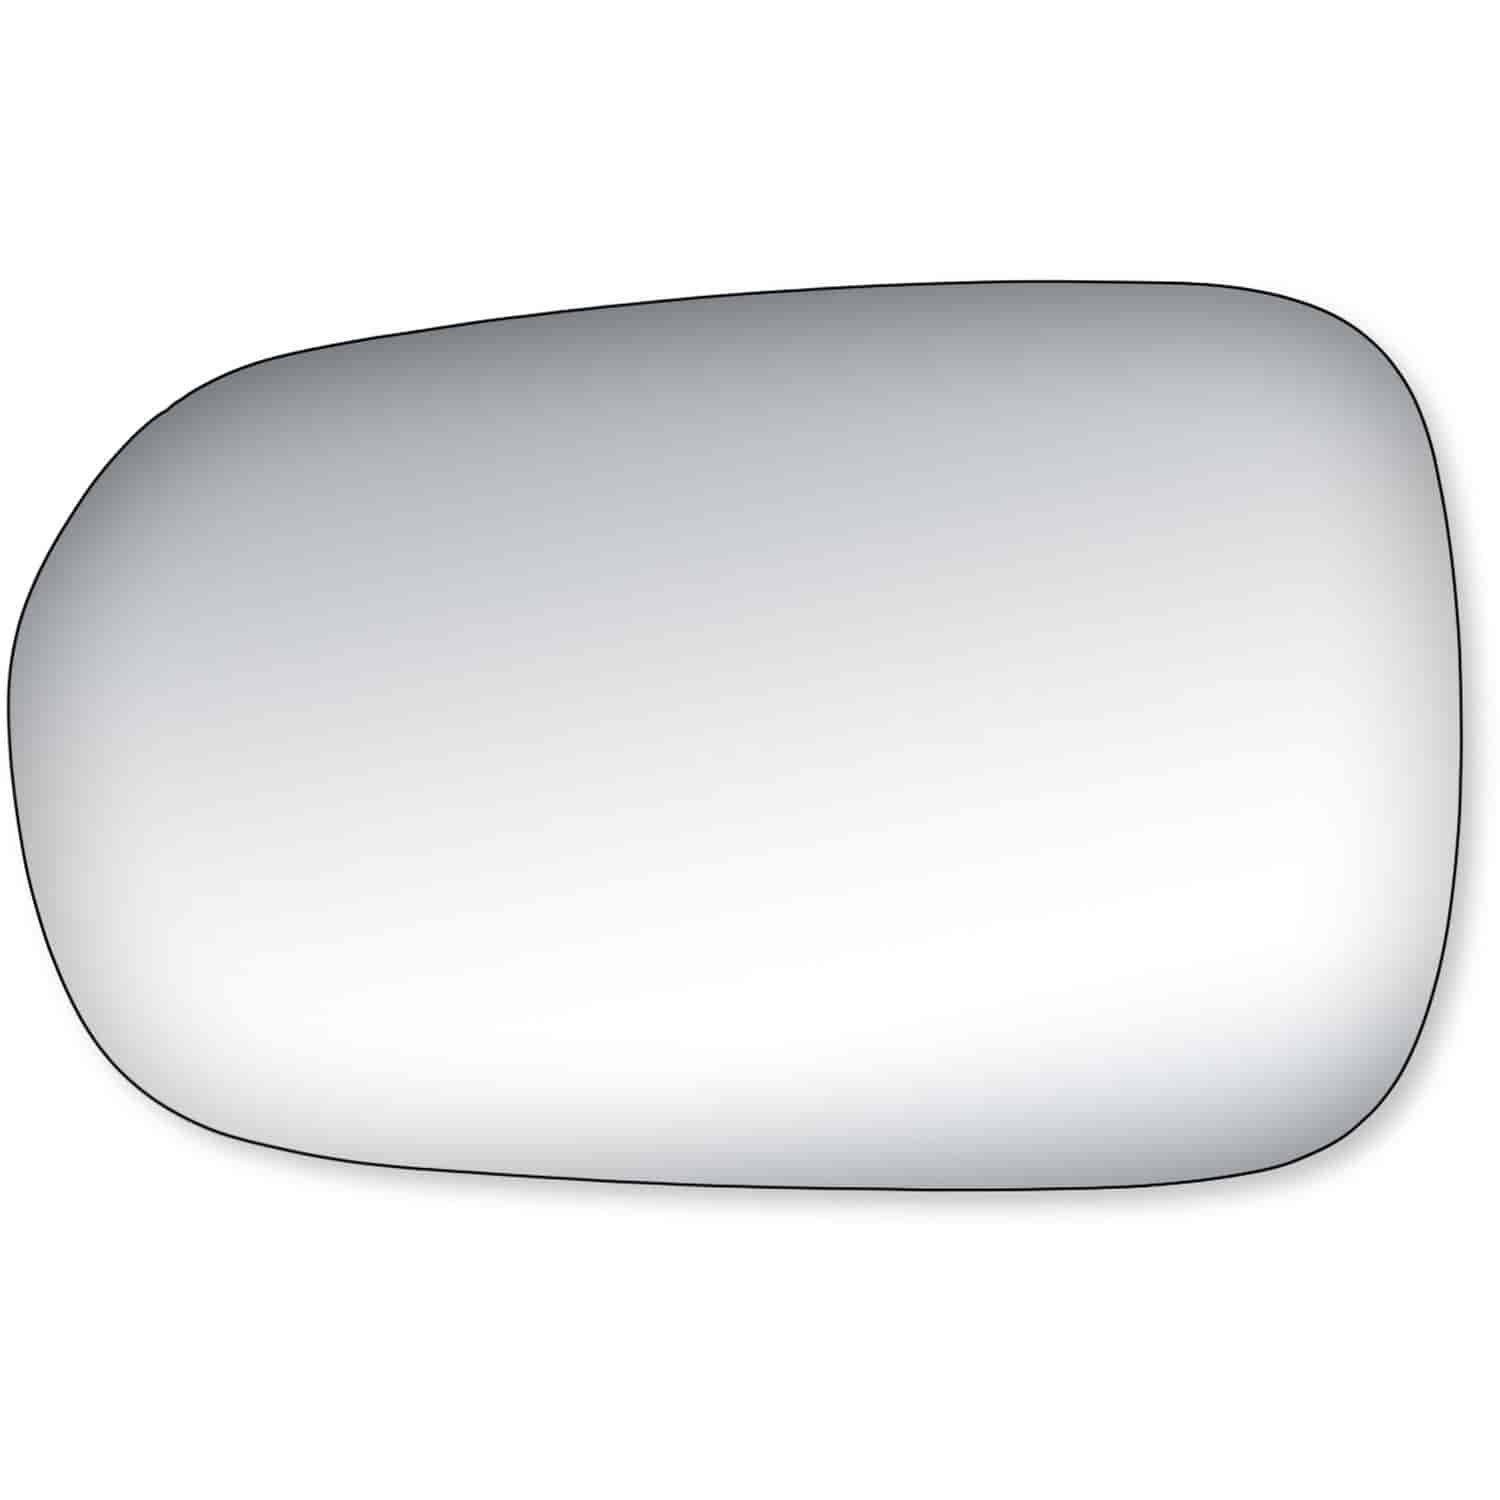 Replacement Glass for 98-02 Accord Sedan the glass measures 4 1/4 tall by 6 7/8 wide and 6 15/16 dia